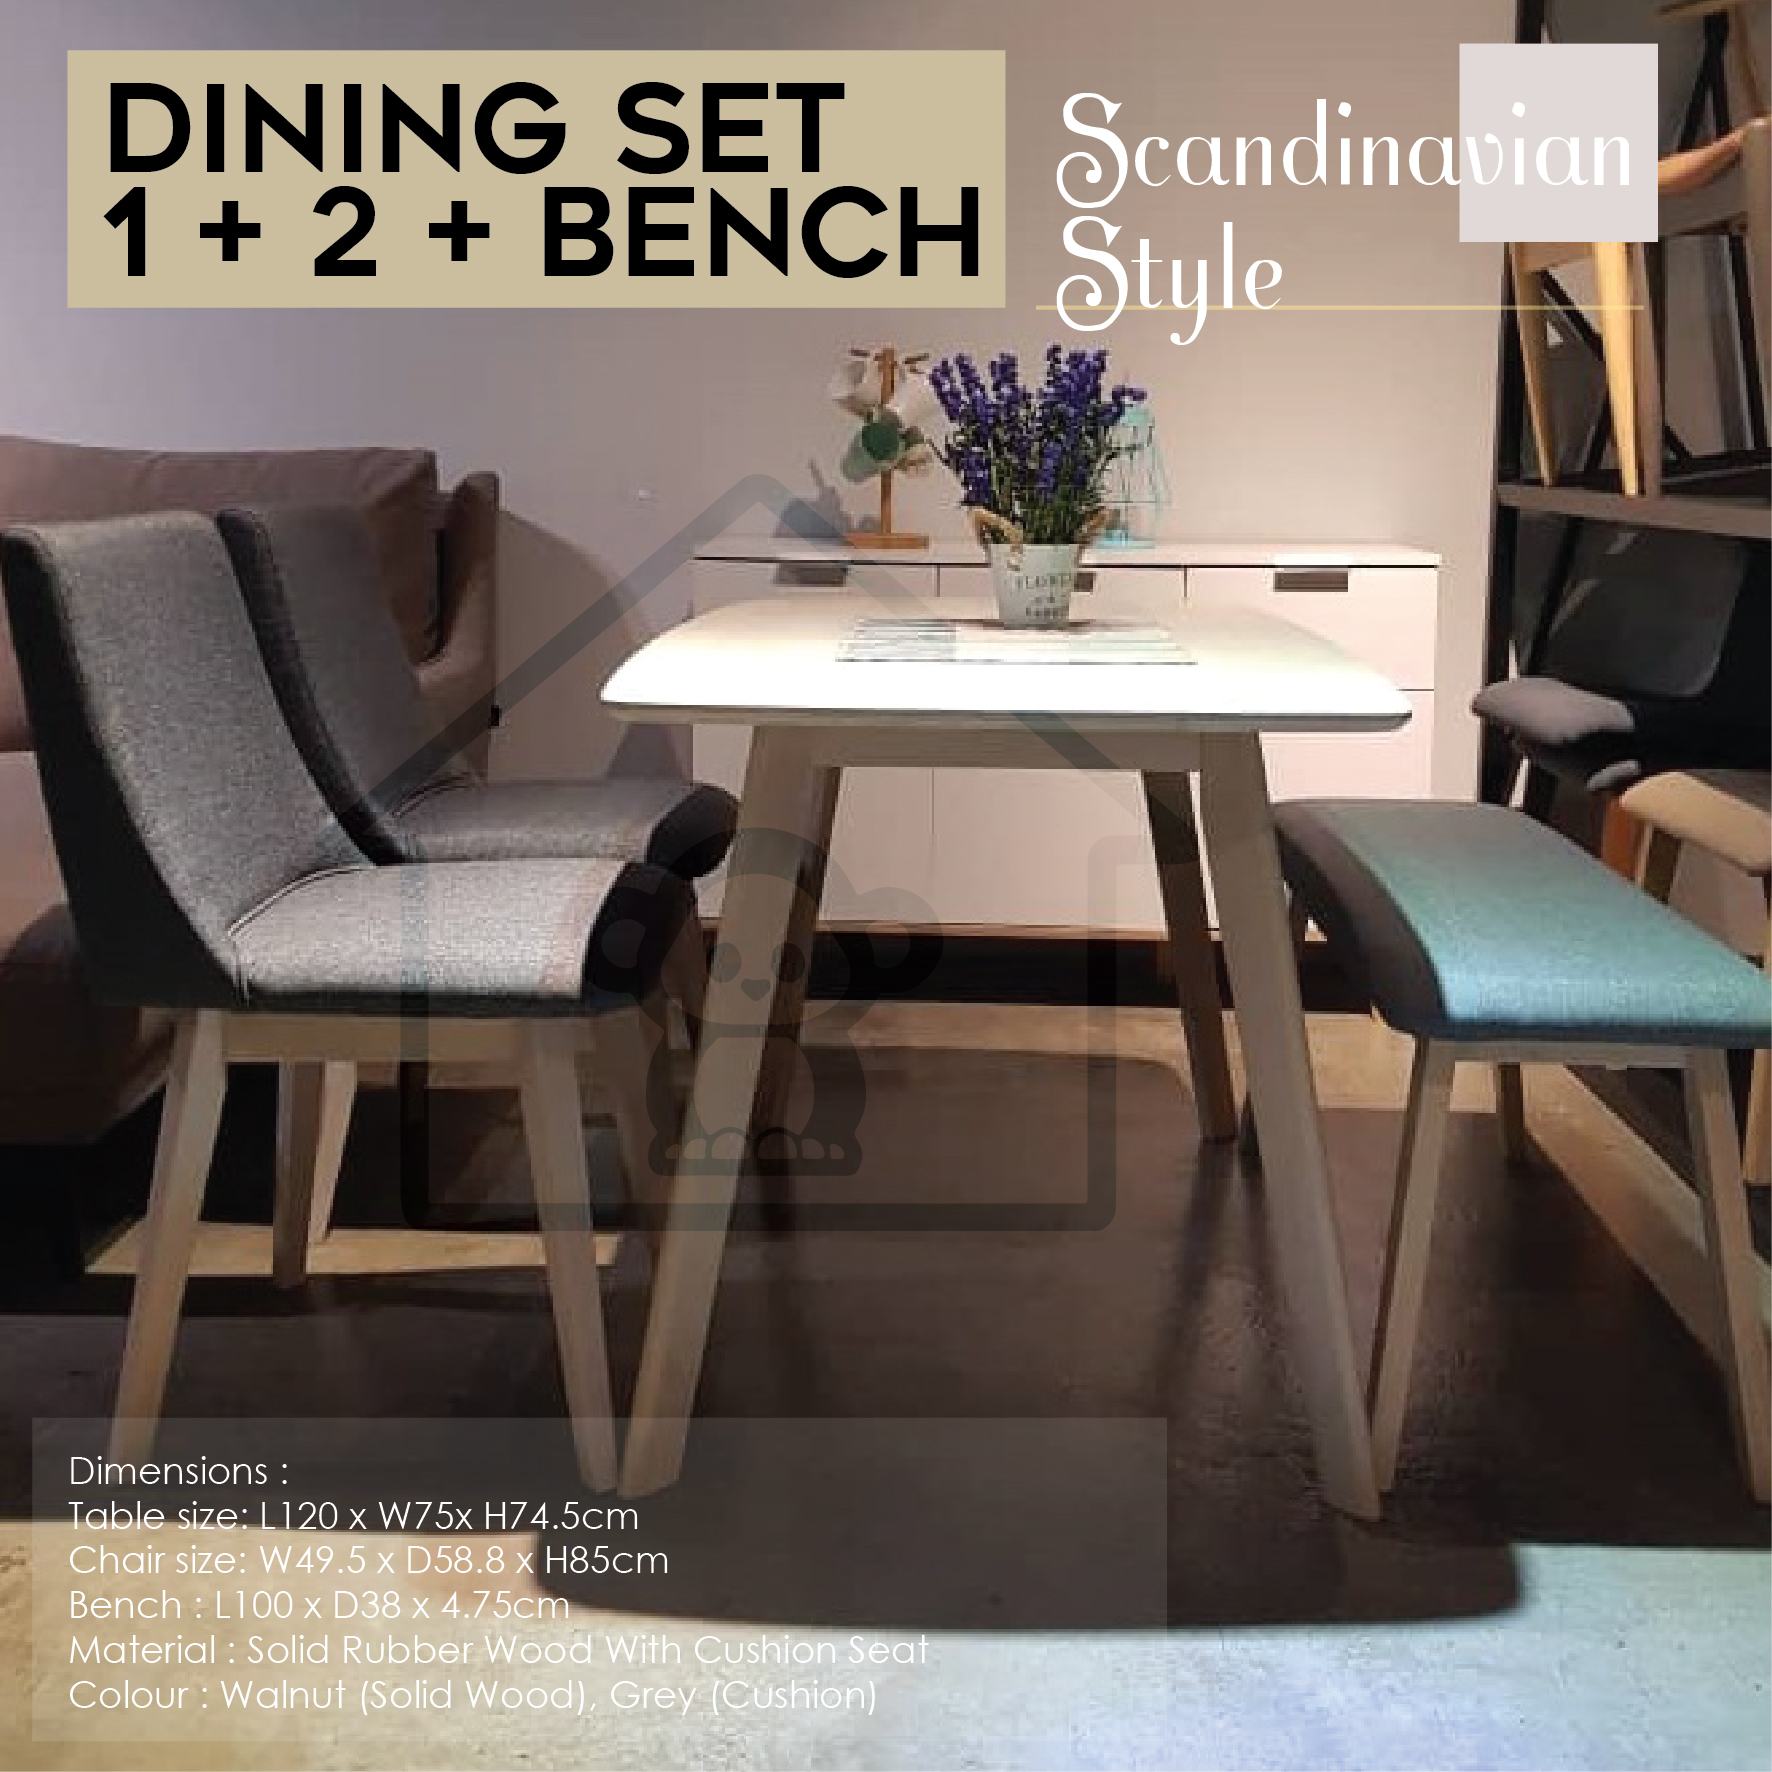 Bench Scandinavian Style Dining Room, Bench Style Dining Table Set